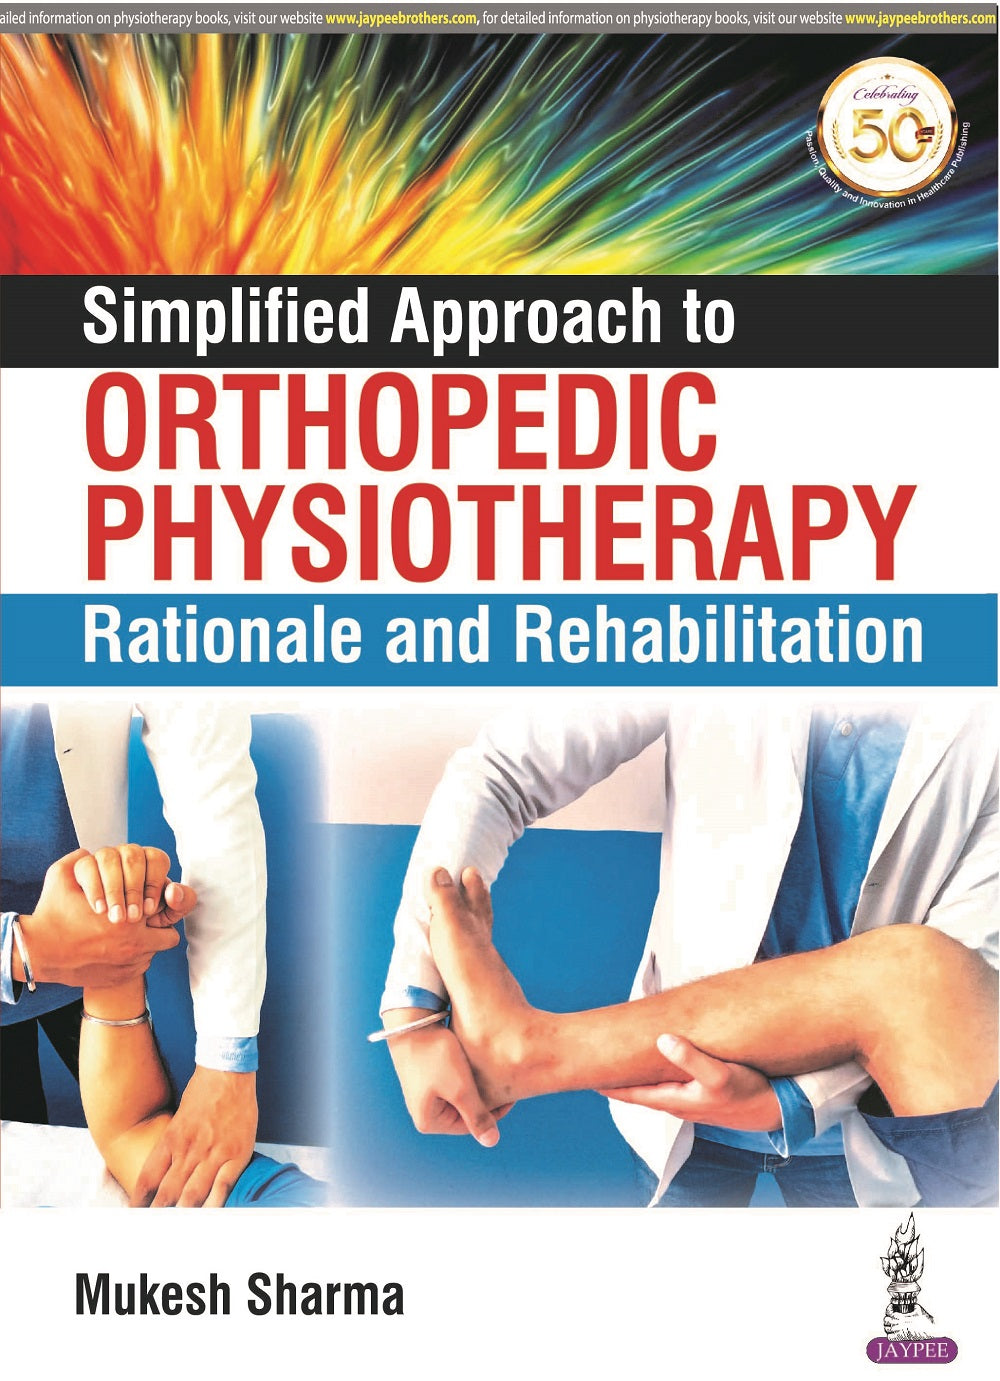 SIMPLIFIED APPROACH TO ORTHOPEDIC PHYSIOTHERAPY RATIONALE AND REHABILITATION
,1/E,MUKESH SHARMA